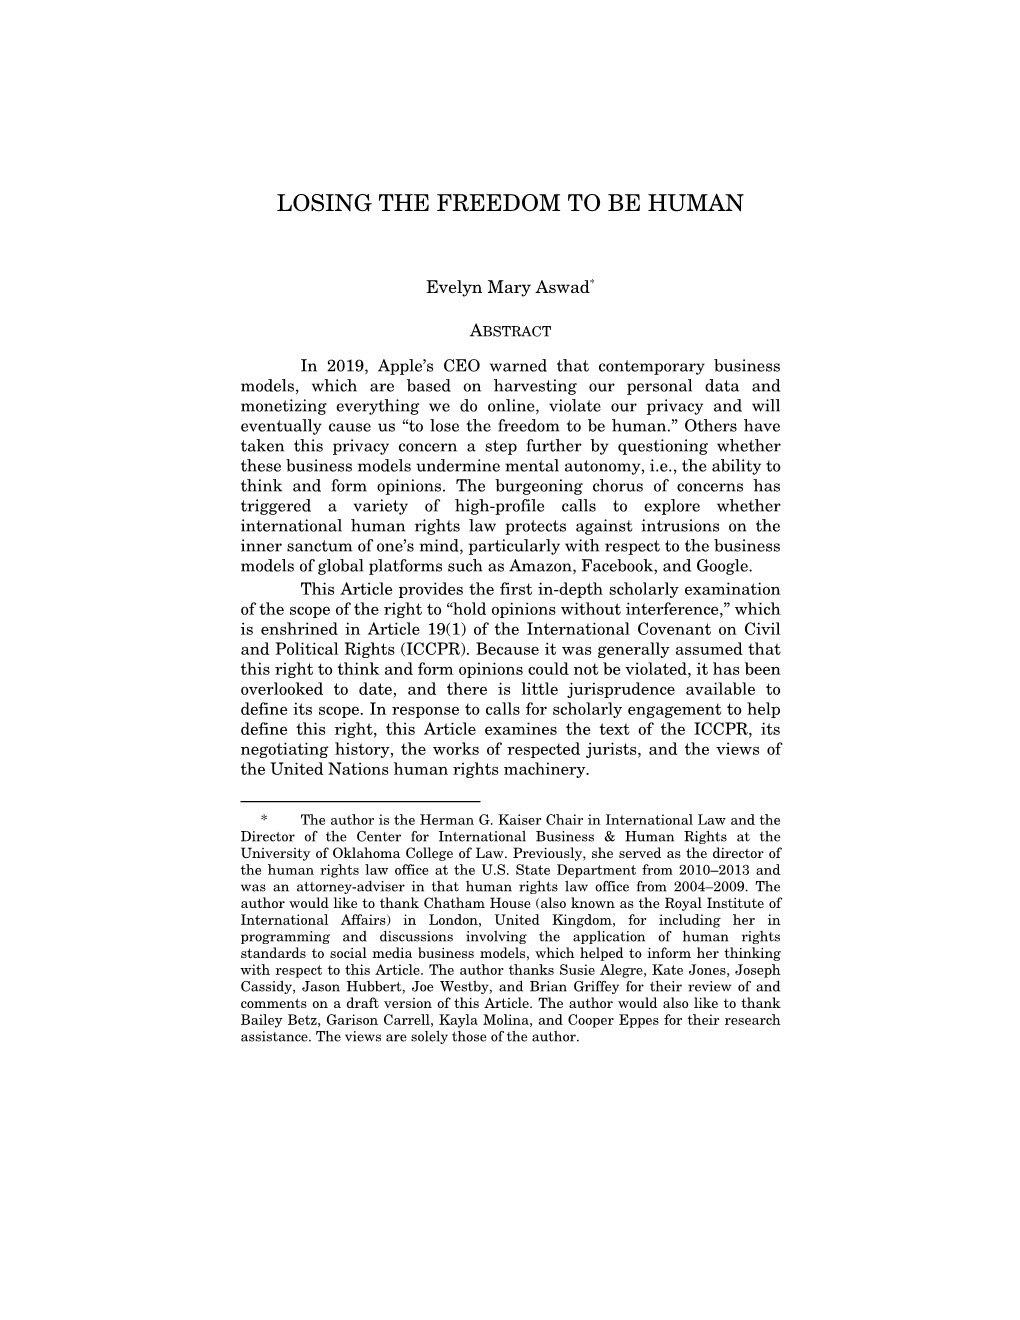 Losing the Freedom to Be Human